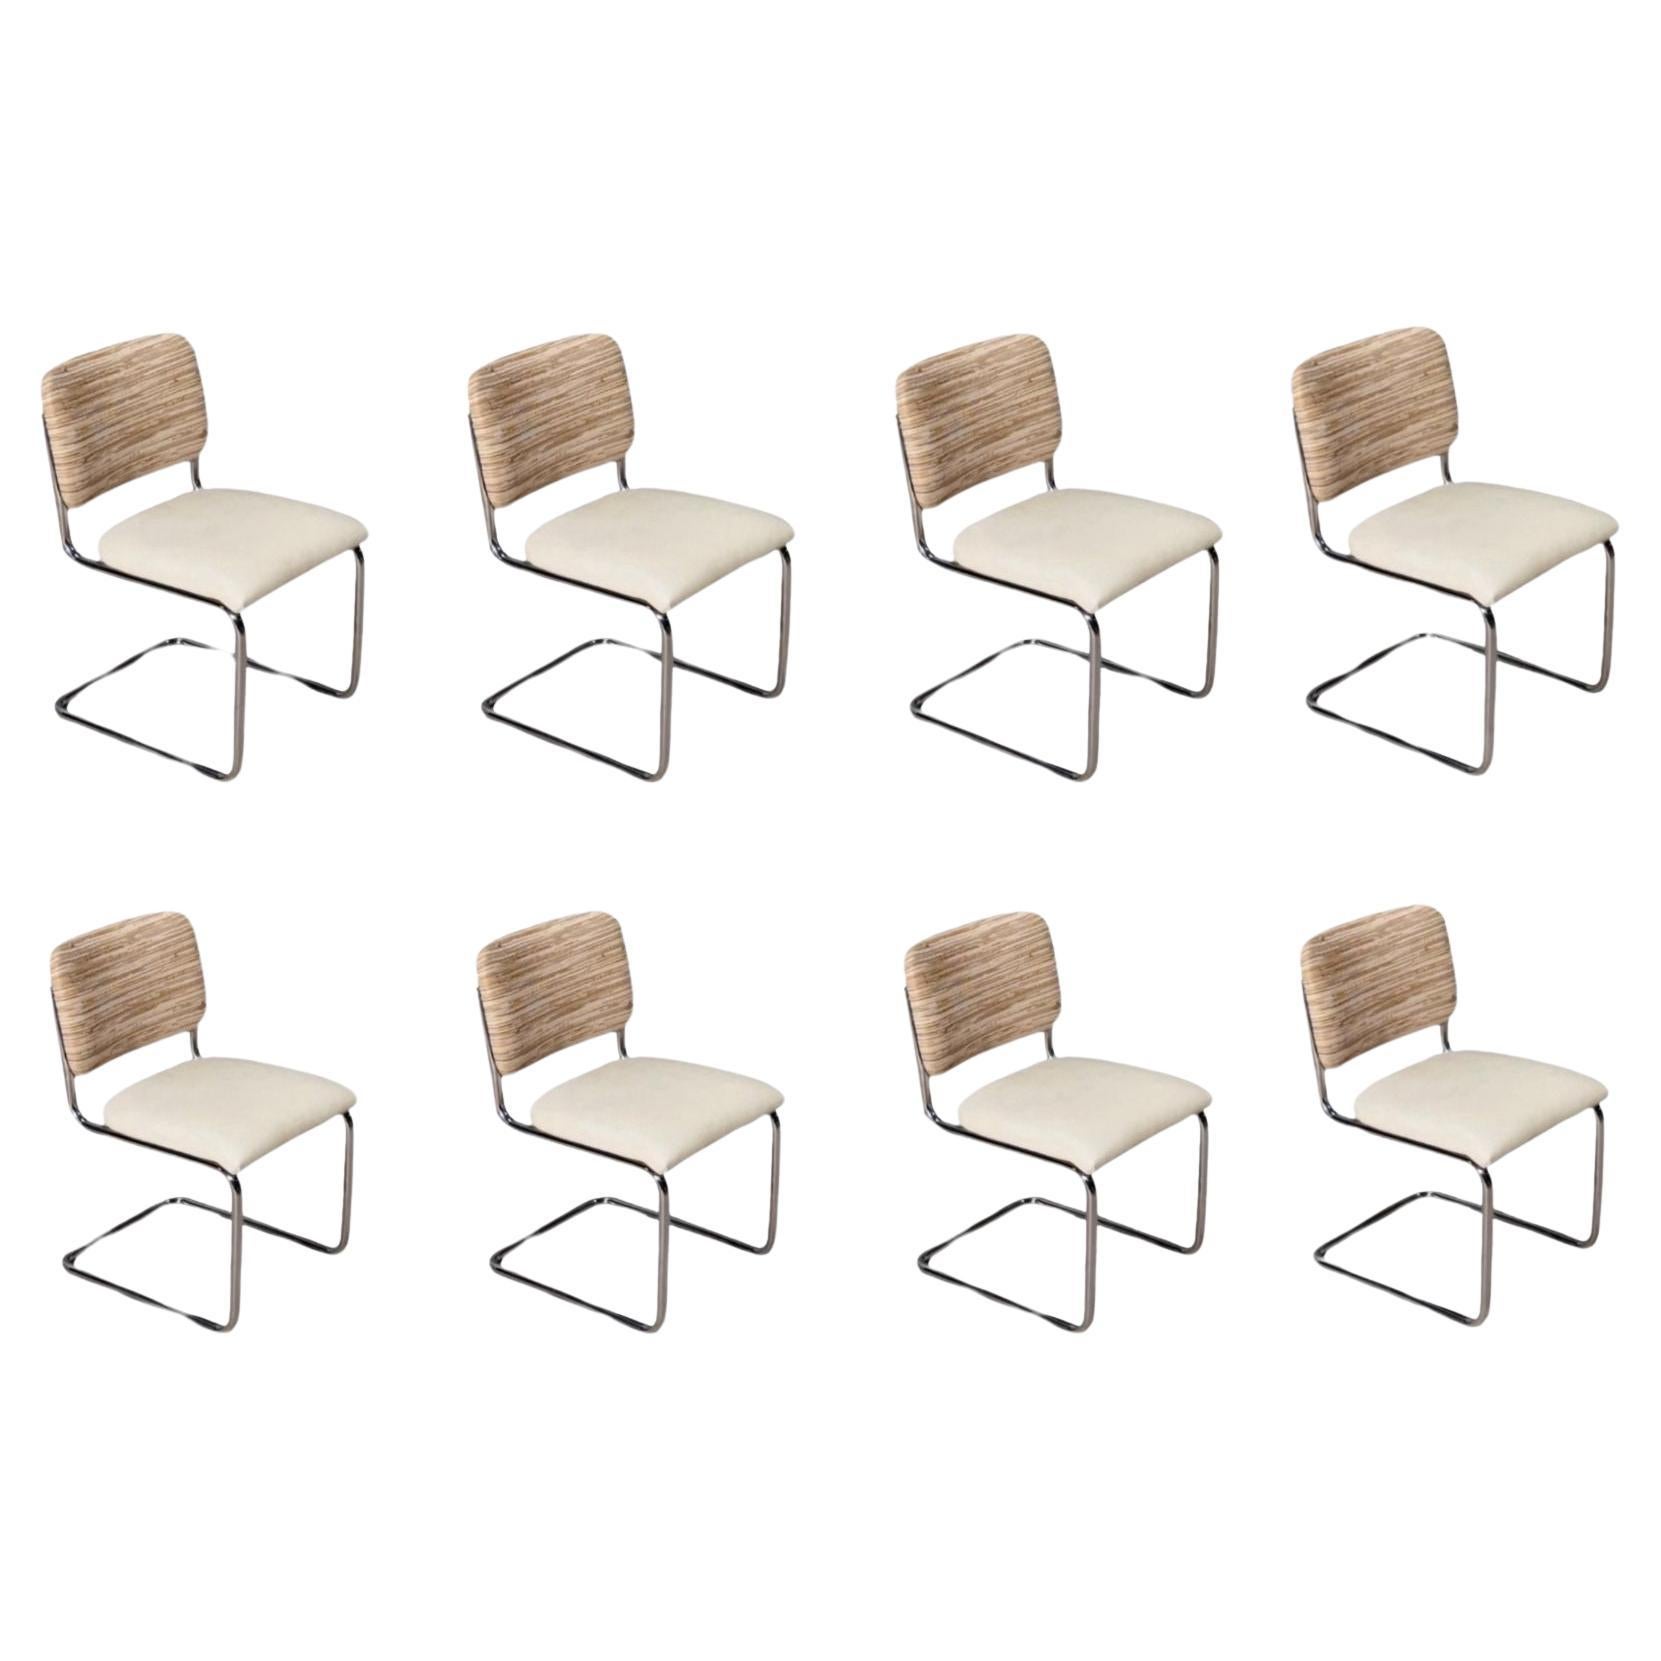 8 Marcel Breuer Cesca Woven Leather Side/Dining Chairs, Knoll 1980 For Sale